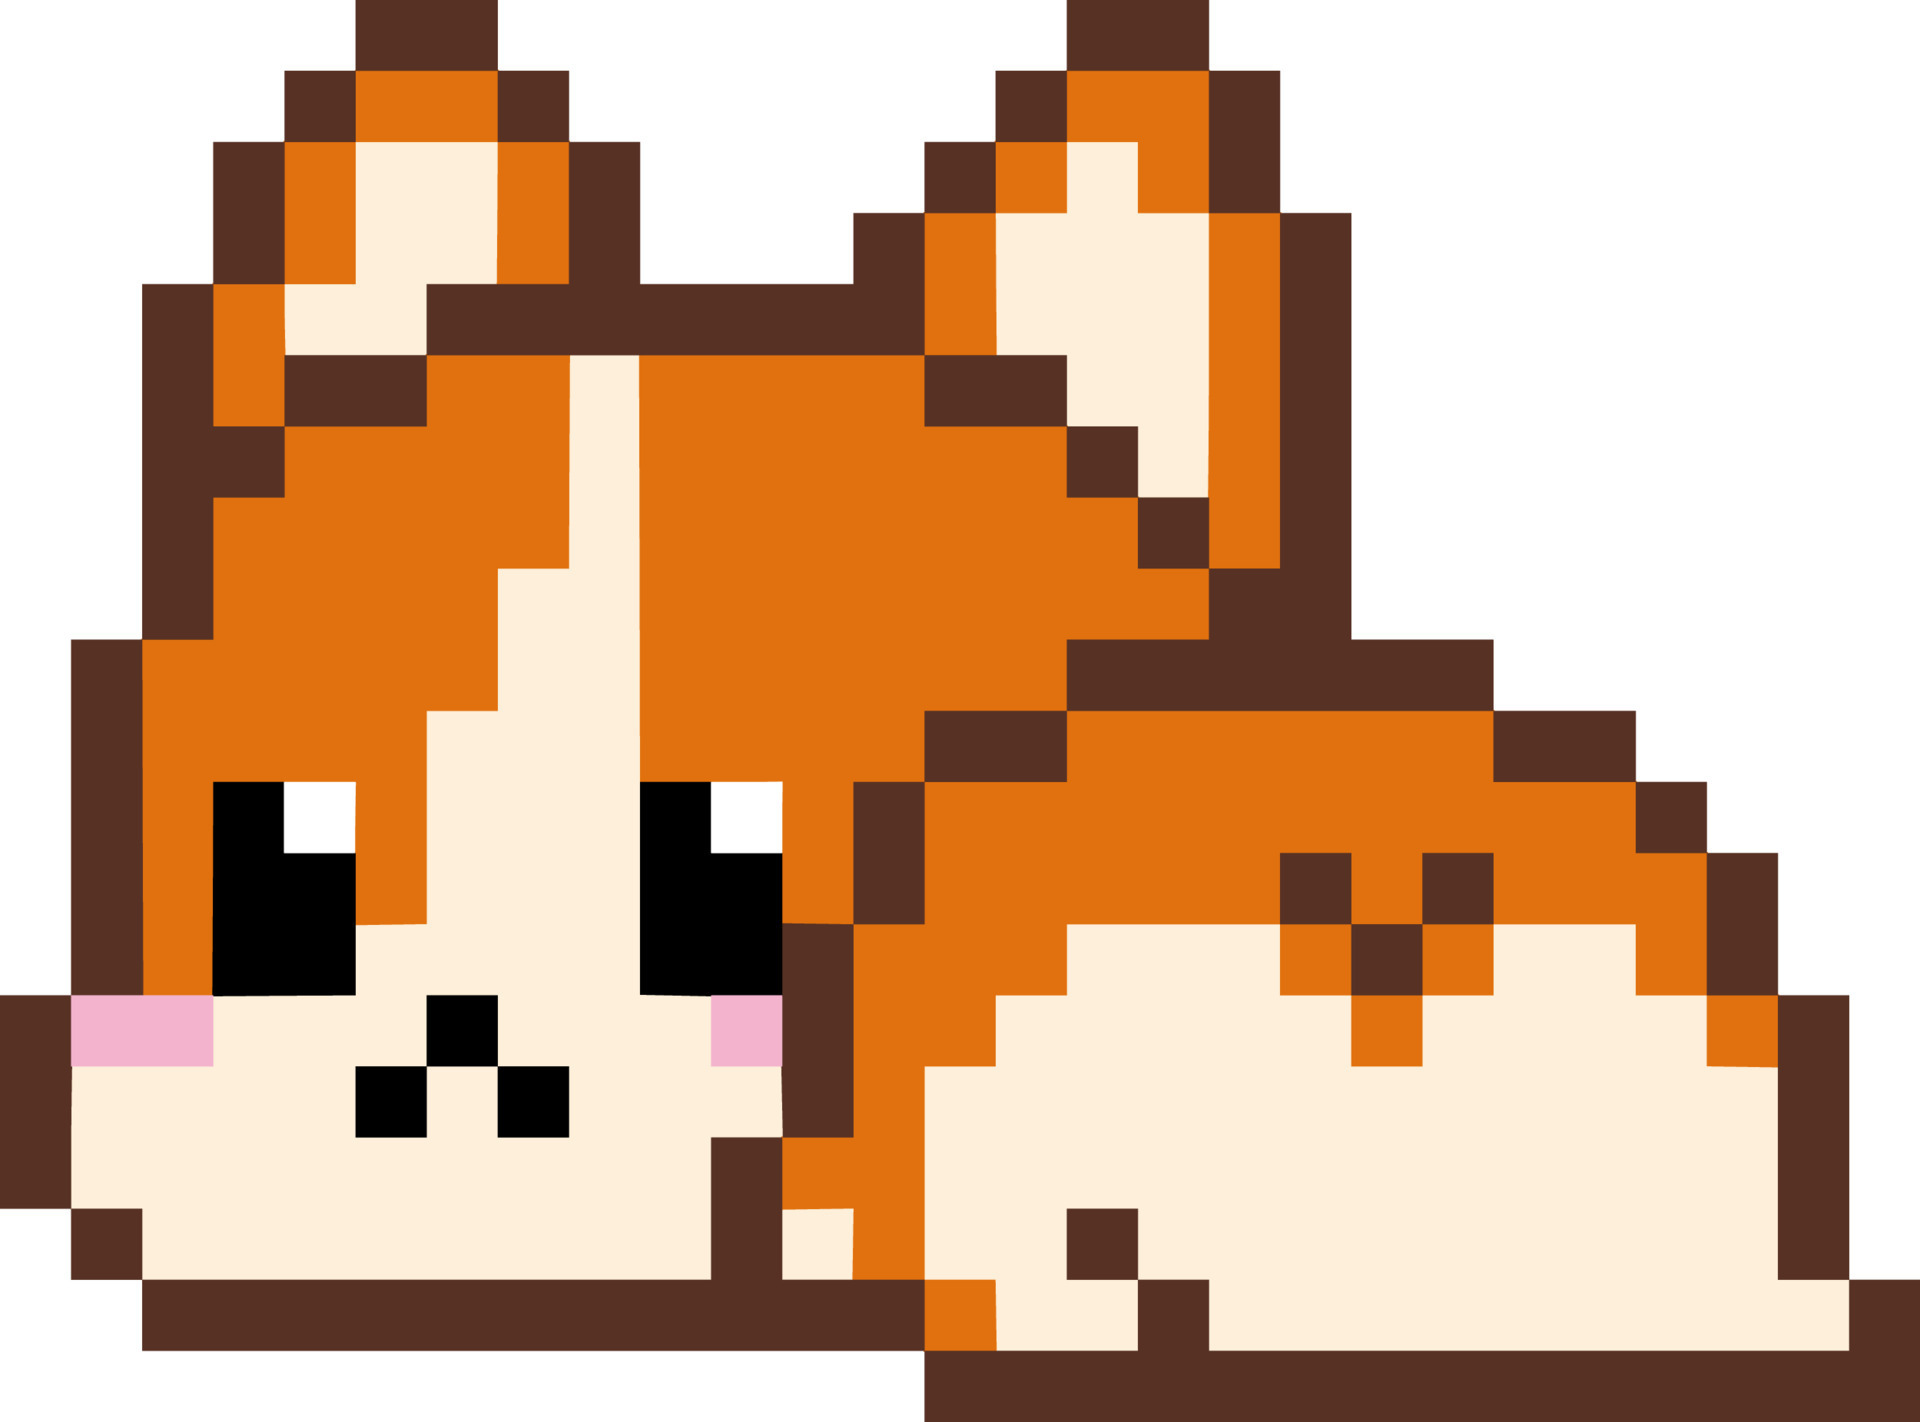 Cute 8 bit pixel cartoon dog. Funny welsh corgi pembroke or cardigan dog  lies on white background with outstretched hind legs, rear view. Juicy  furry pets ass. Pixel art 80s-90s style icons.